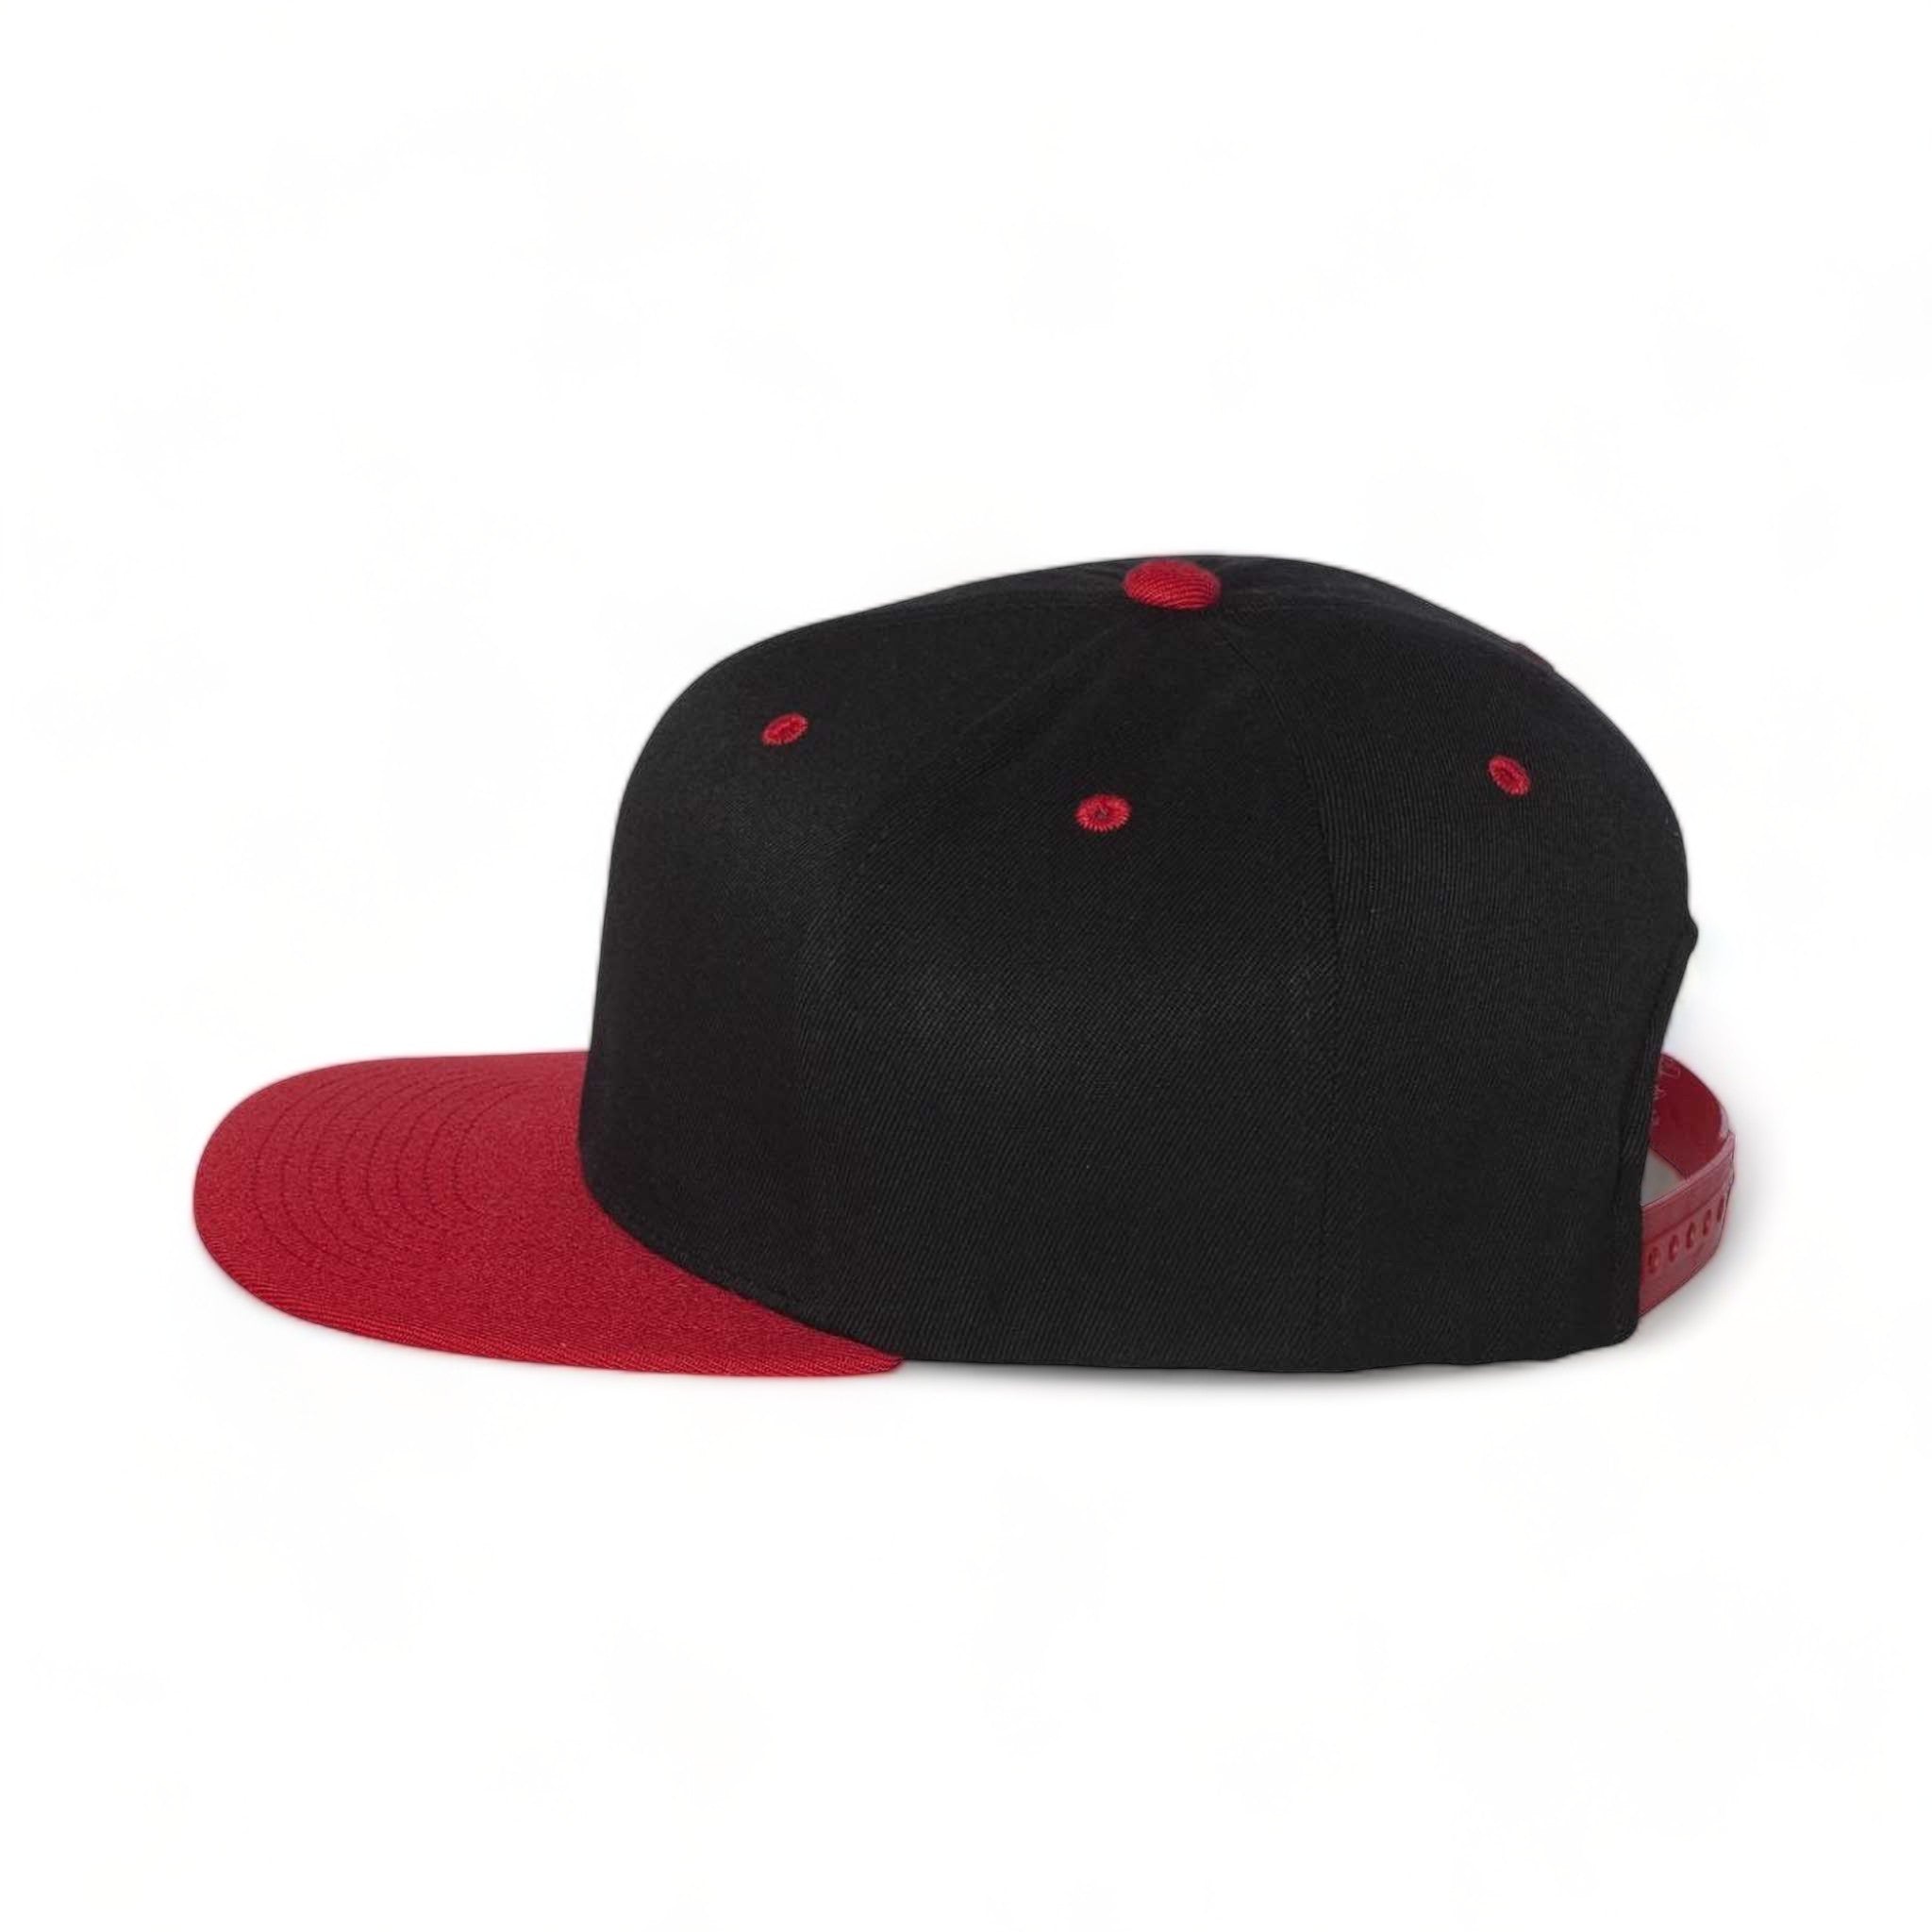 Side view of Flexfit 110F custom hat in black and red